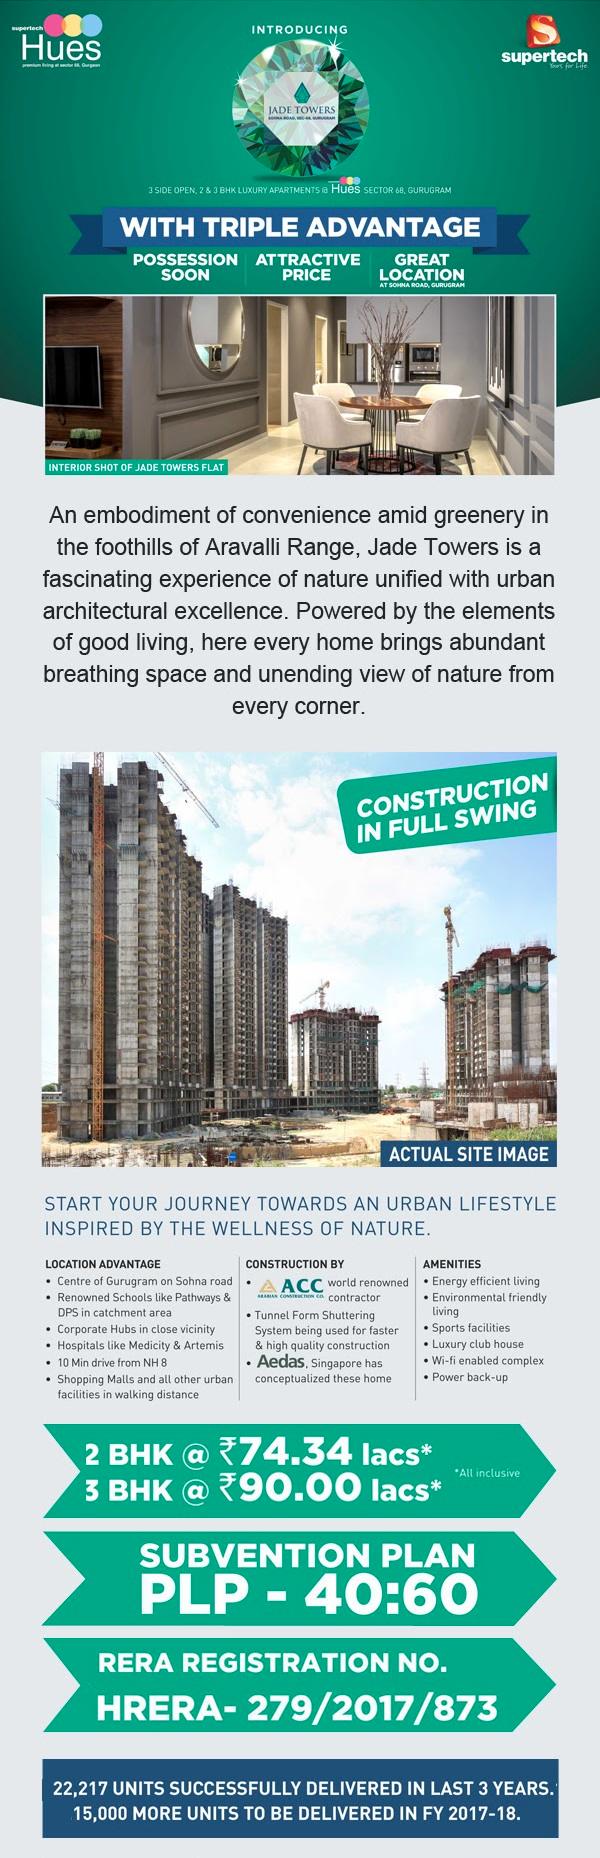 Supertech Jade Towers offers 2 BHK @ 74.34 lacs & 3 BHK @ 90 lacs with subvention plan of 40:60